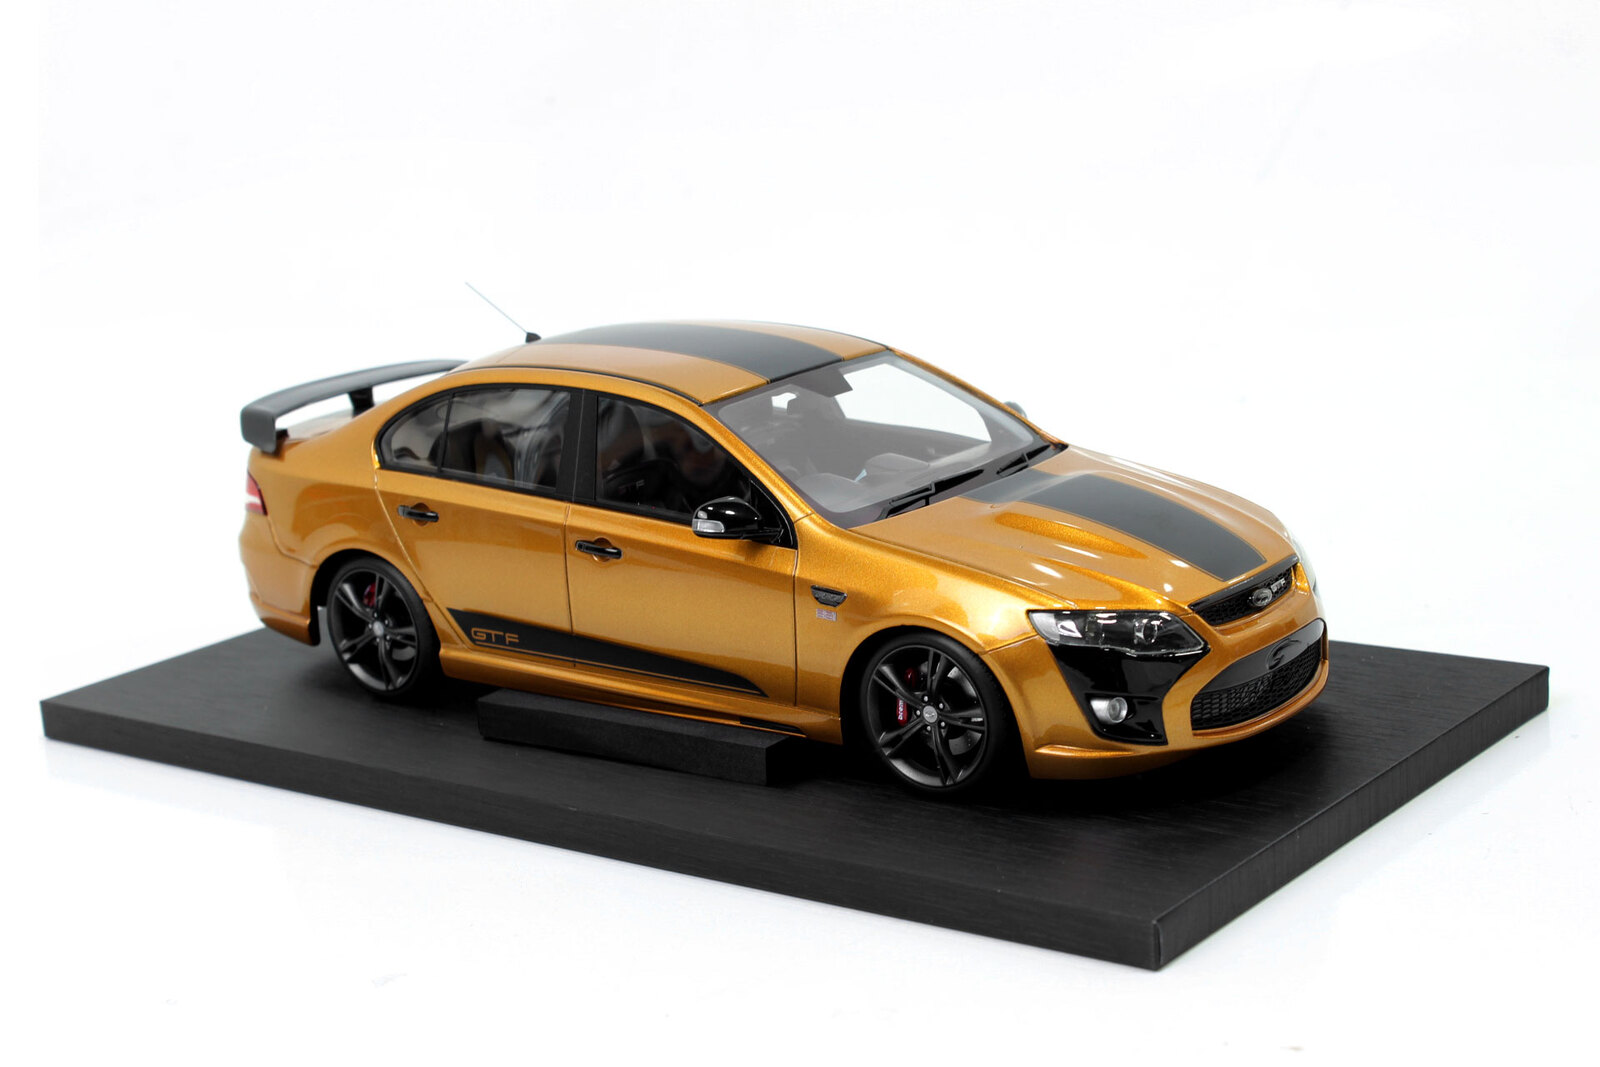 FORD FALCON FPV GT F VICTORY GOLD WITH BLACK STRIPES 1:18 SCALE MODEL CAR 